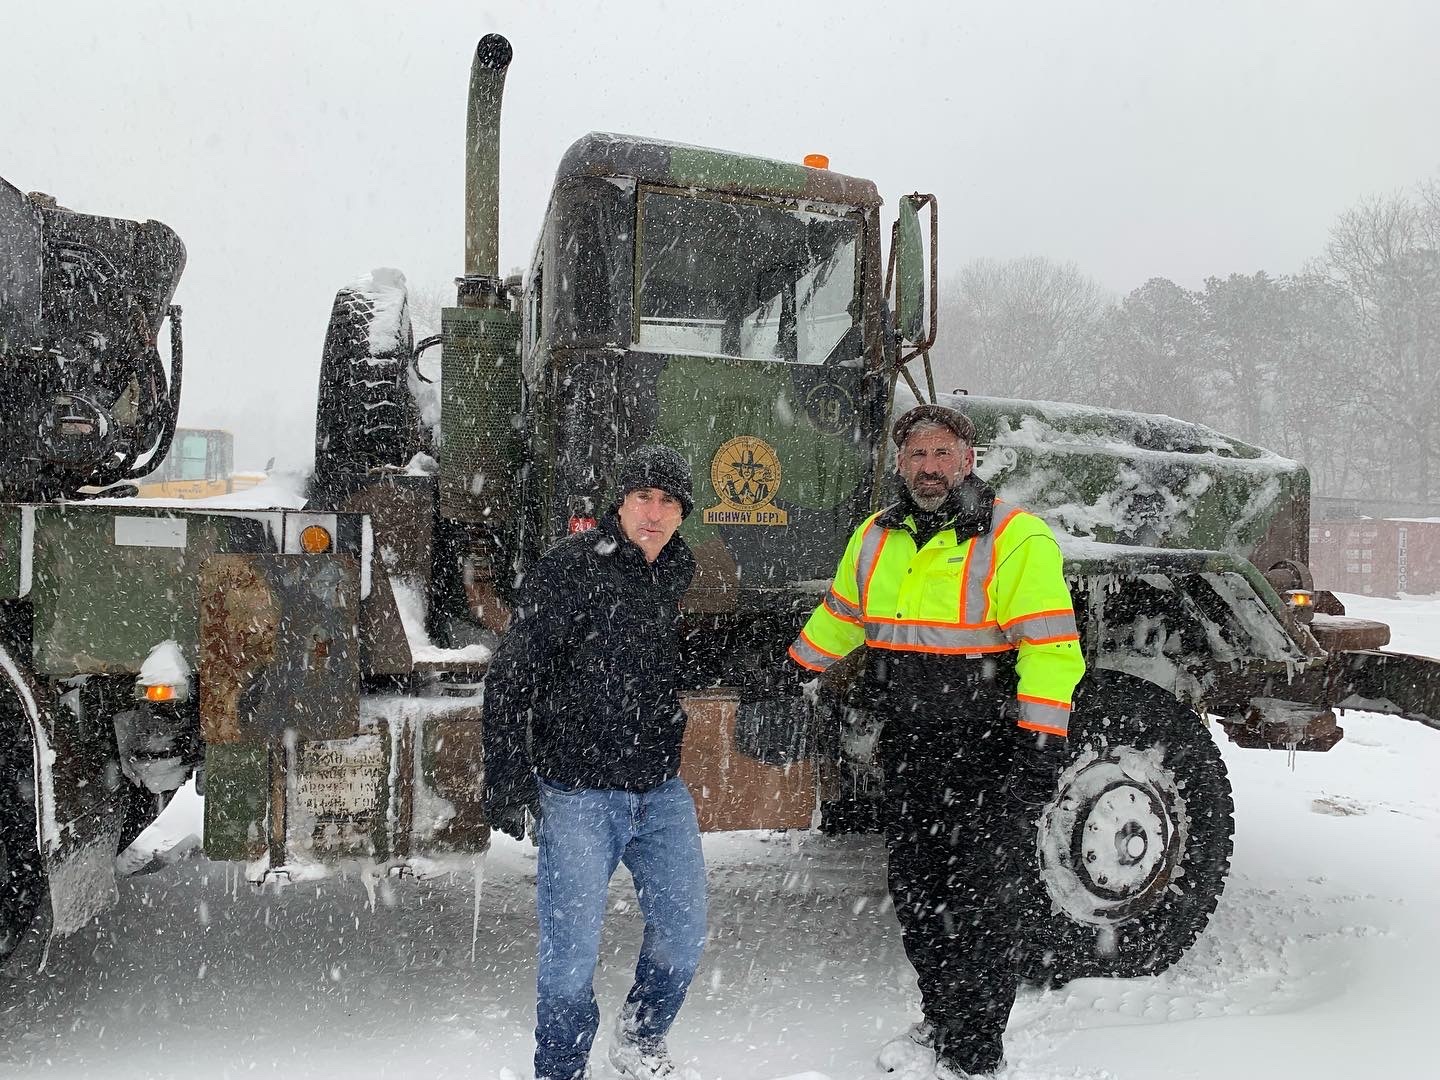 Southampton Town Supervisor Jay Schneiderman, shown alongside highway superintendent Charlie McArdle, was out assessing conditions on Saturday and helped several motorists who he came across stranded on roadways in the town.